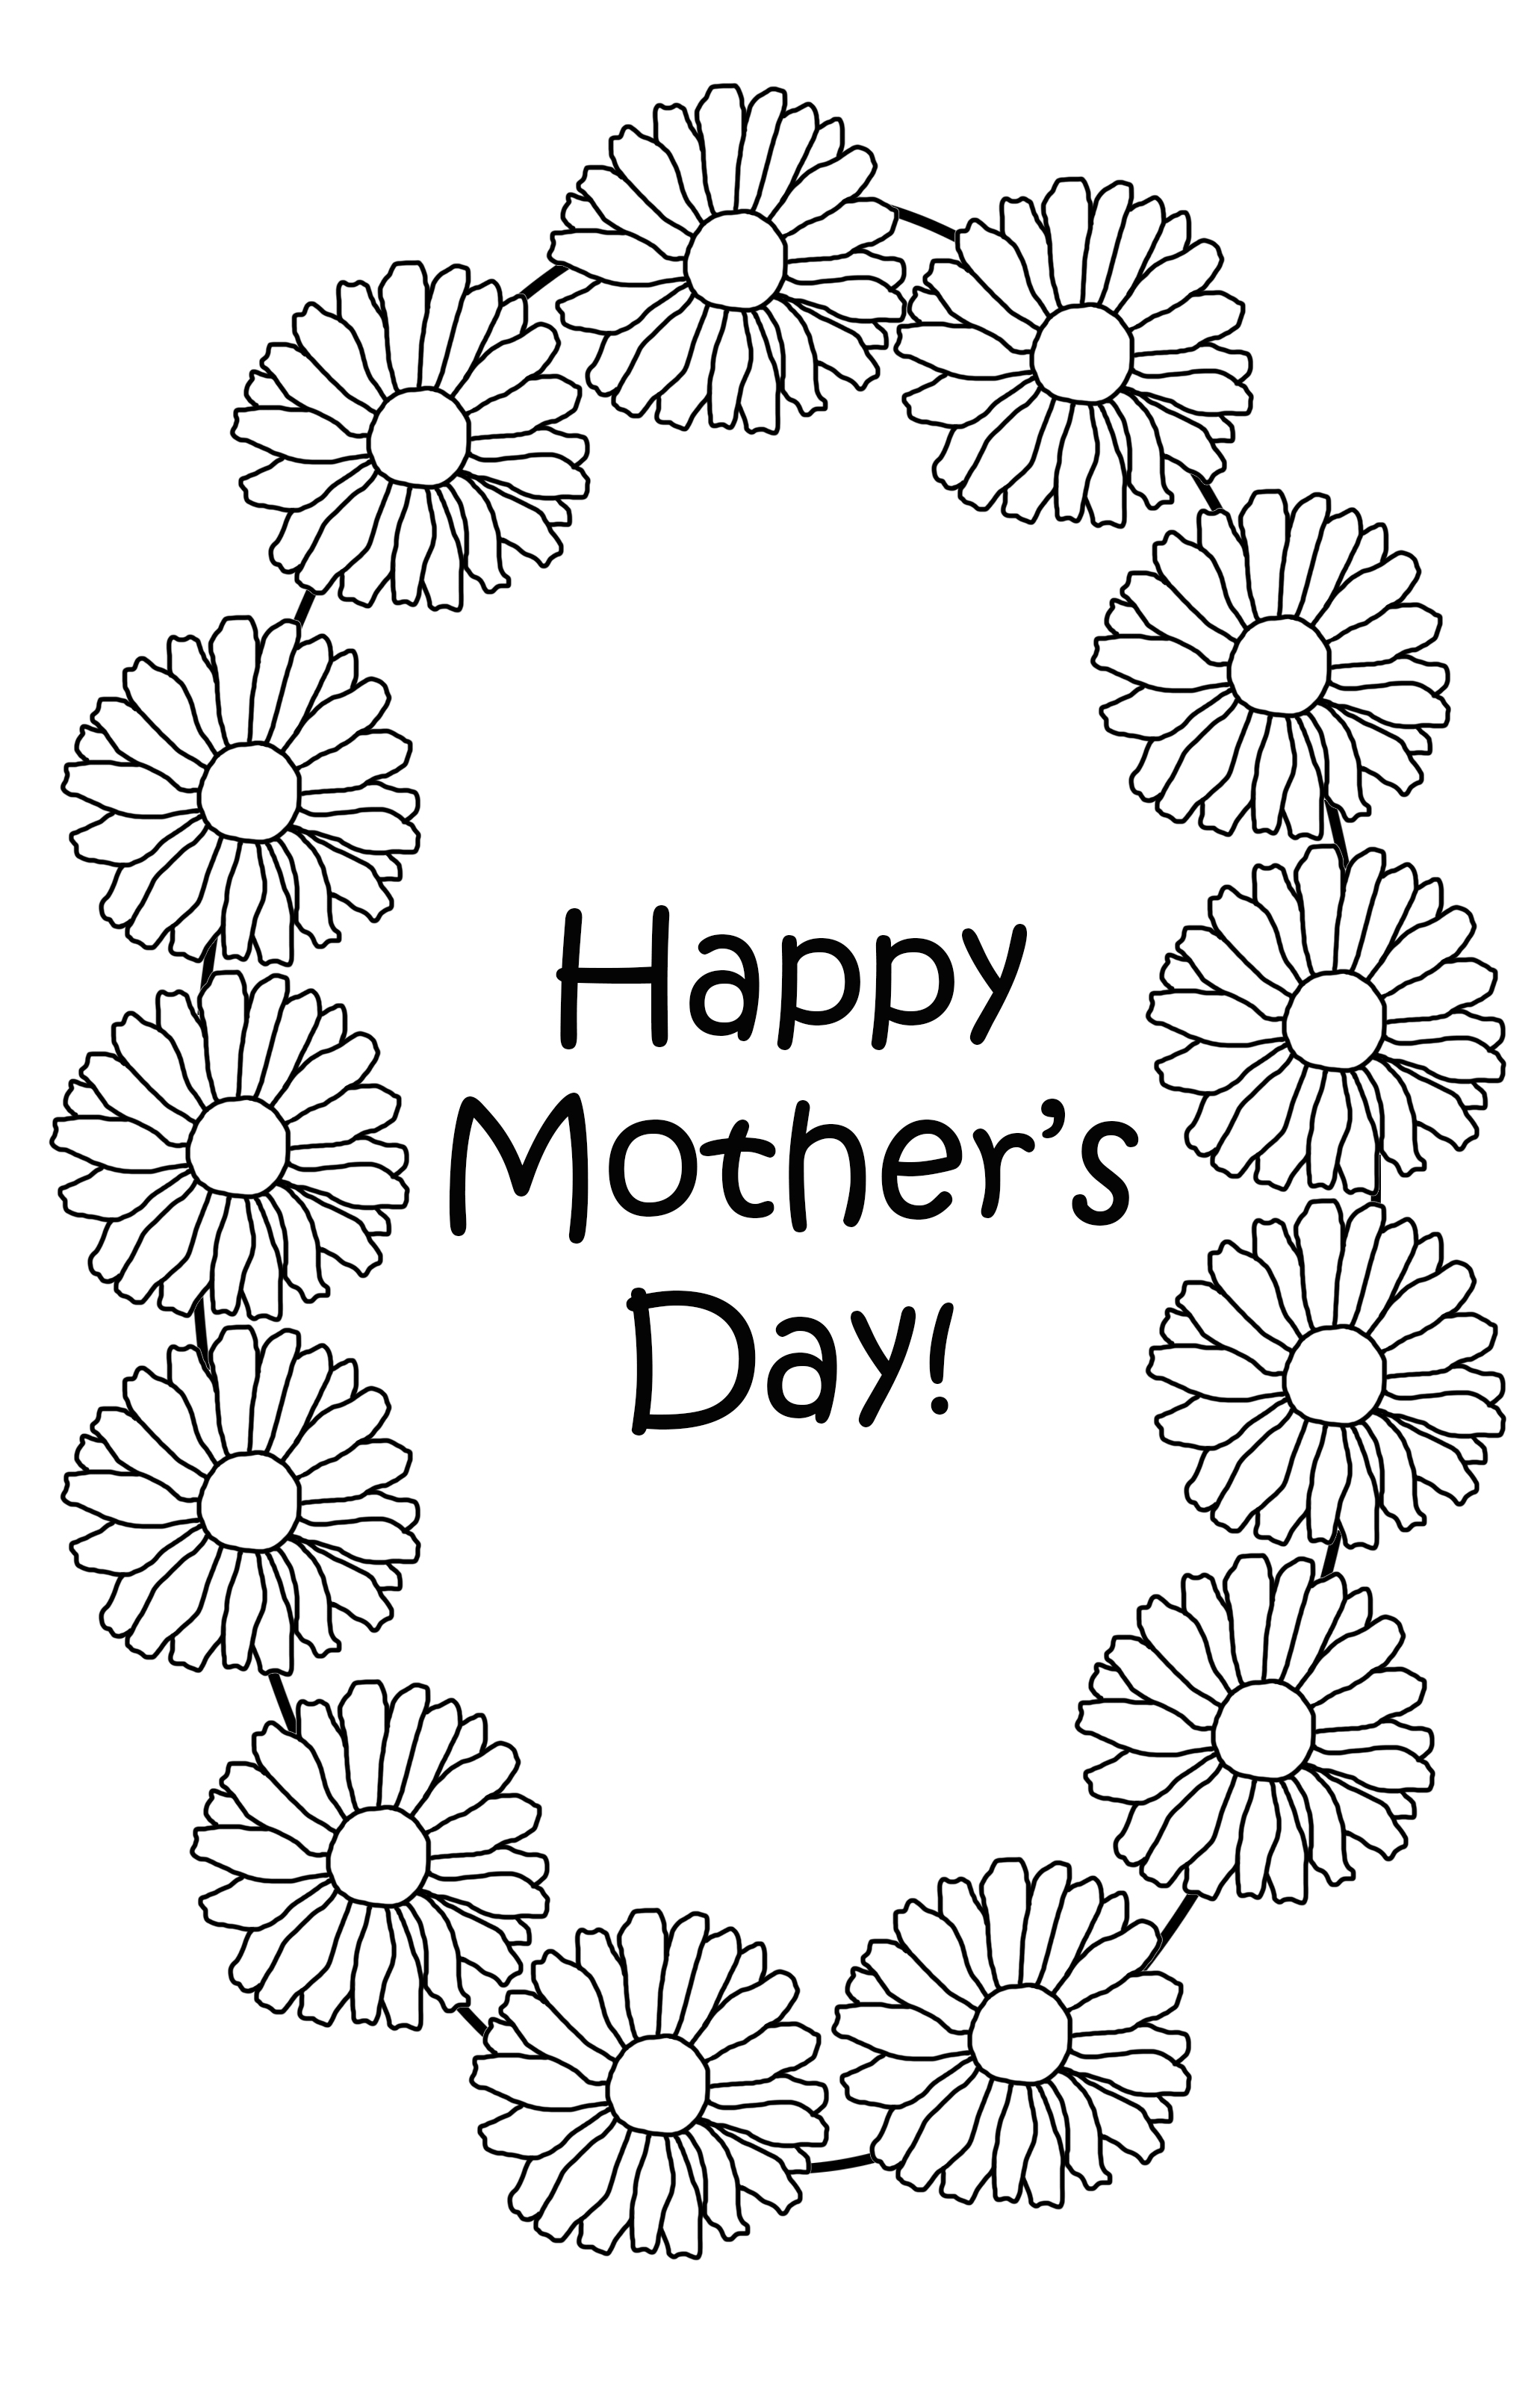 free-printable-mother-s-day-coloring-pages-for-kids